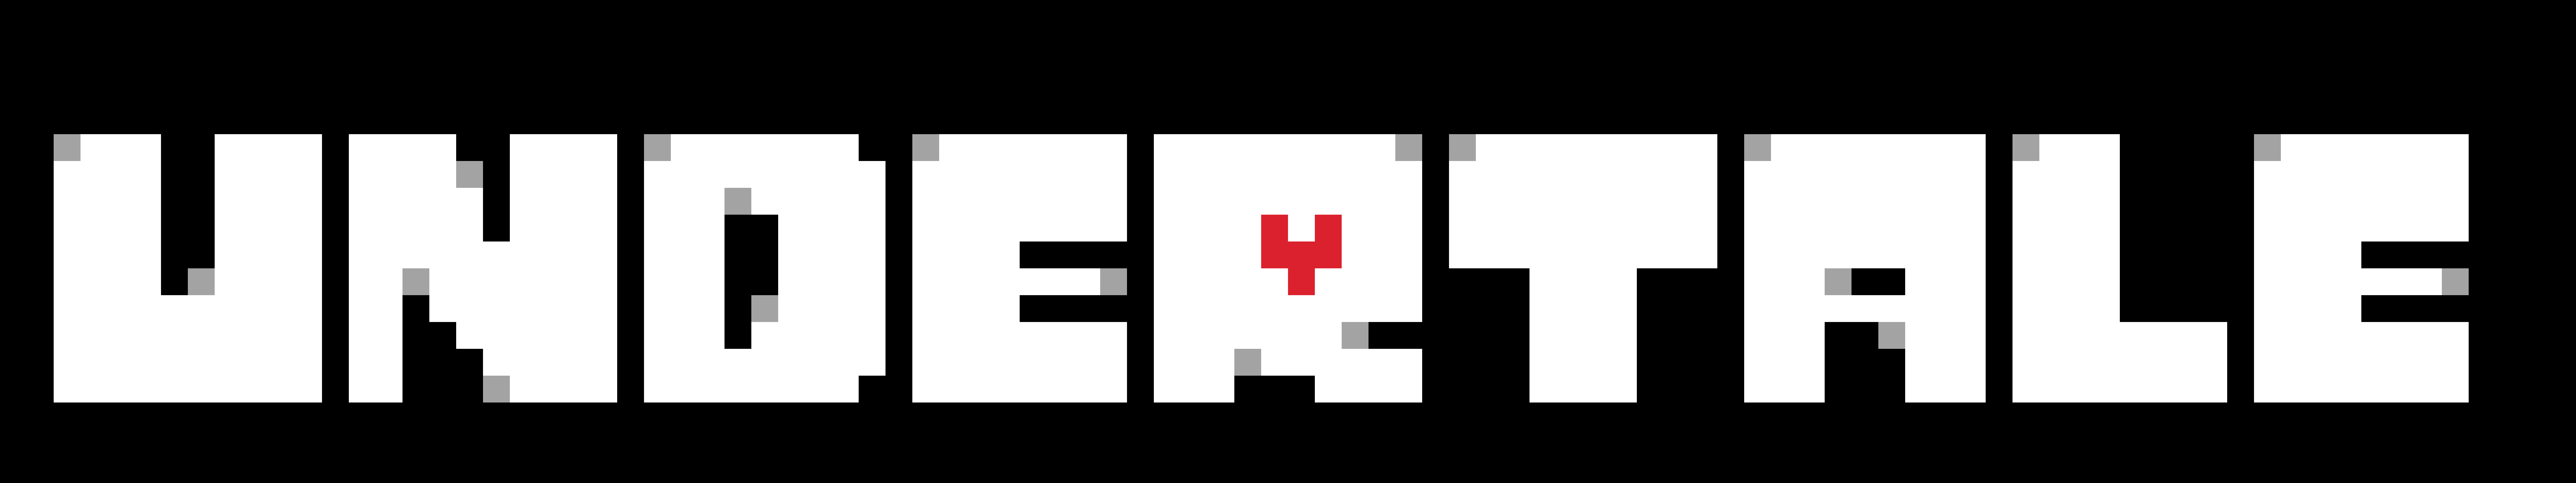 the logo for Undertale. it is the word 'undertale' in all caps and white block letters on a black background. inside the hole of the capital R is a red heart